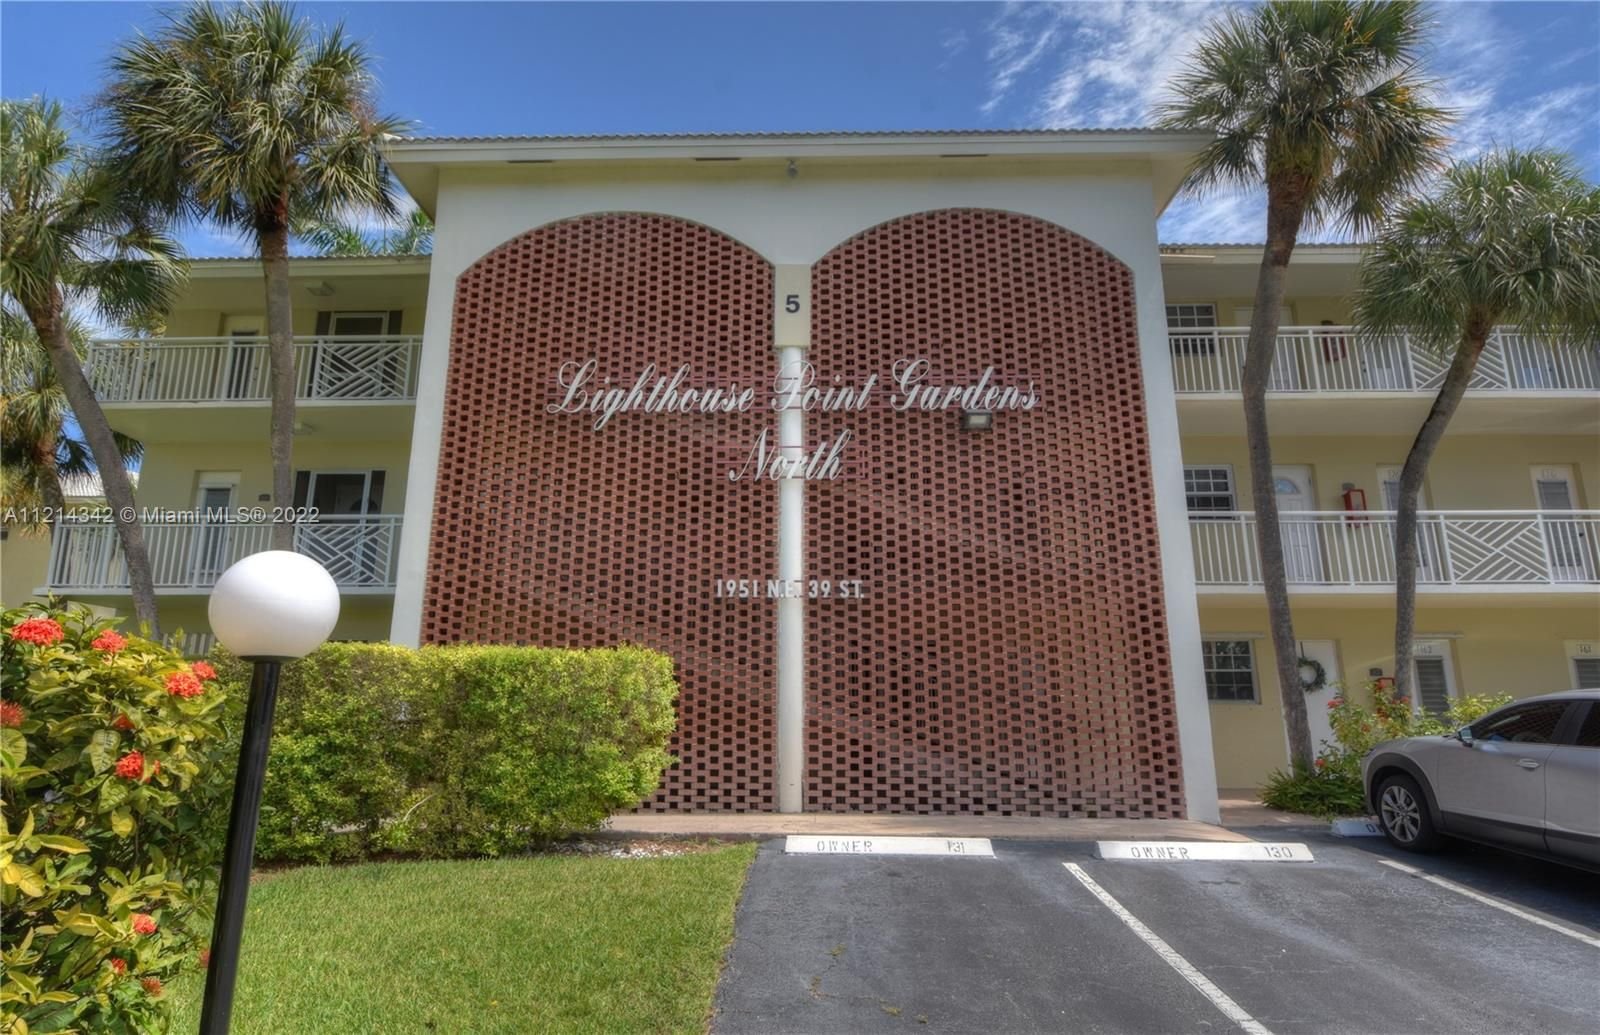 Real estate property located at 1951 39th St #239, Broward County, Lighthouse Point, FL